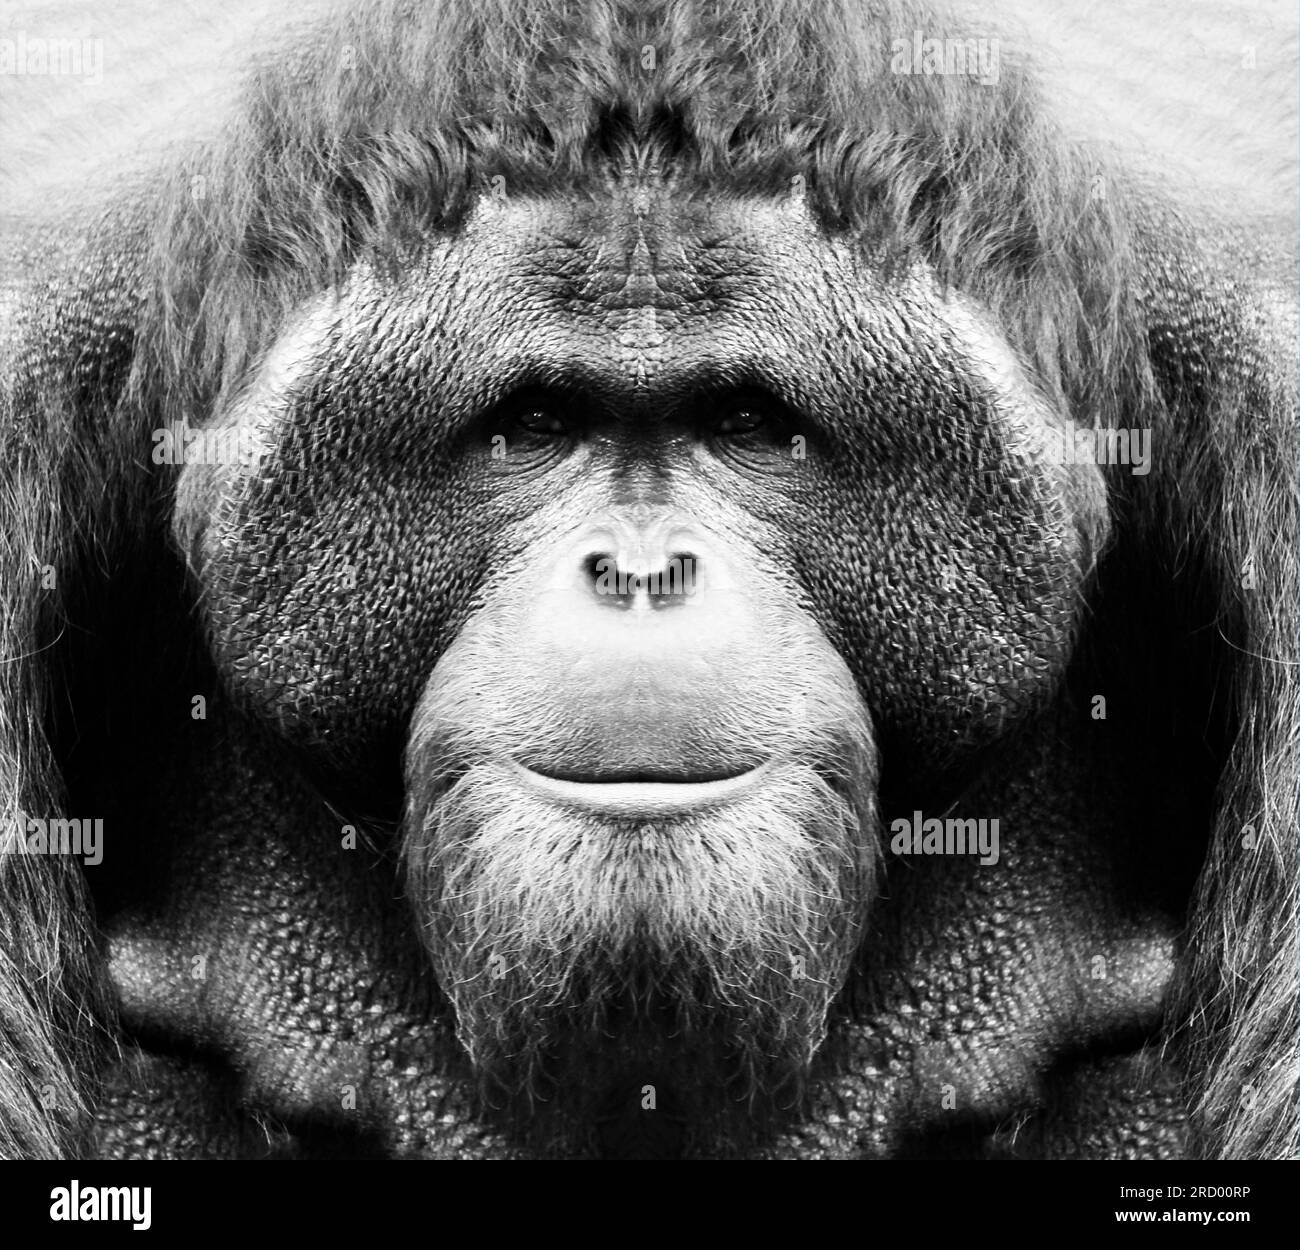 A beautiful black and white portrait of a monkey at close range that looks at the camera. Orangutan. Stock Photo